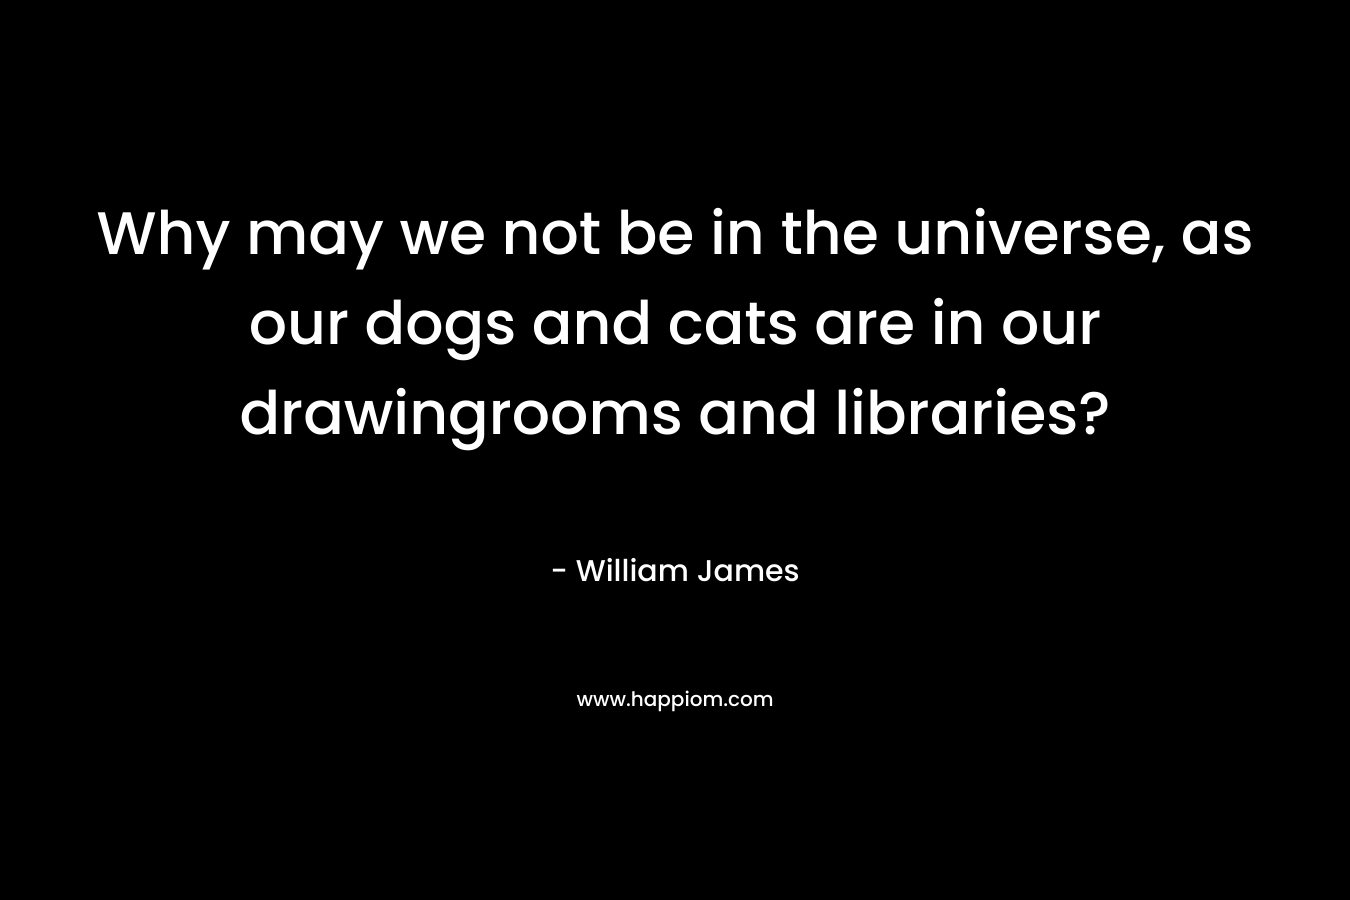 Why may we not be in the universe, as our dogs and cats are in our drawingrooms and libraries? – William James